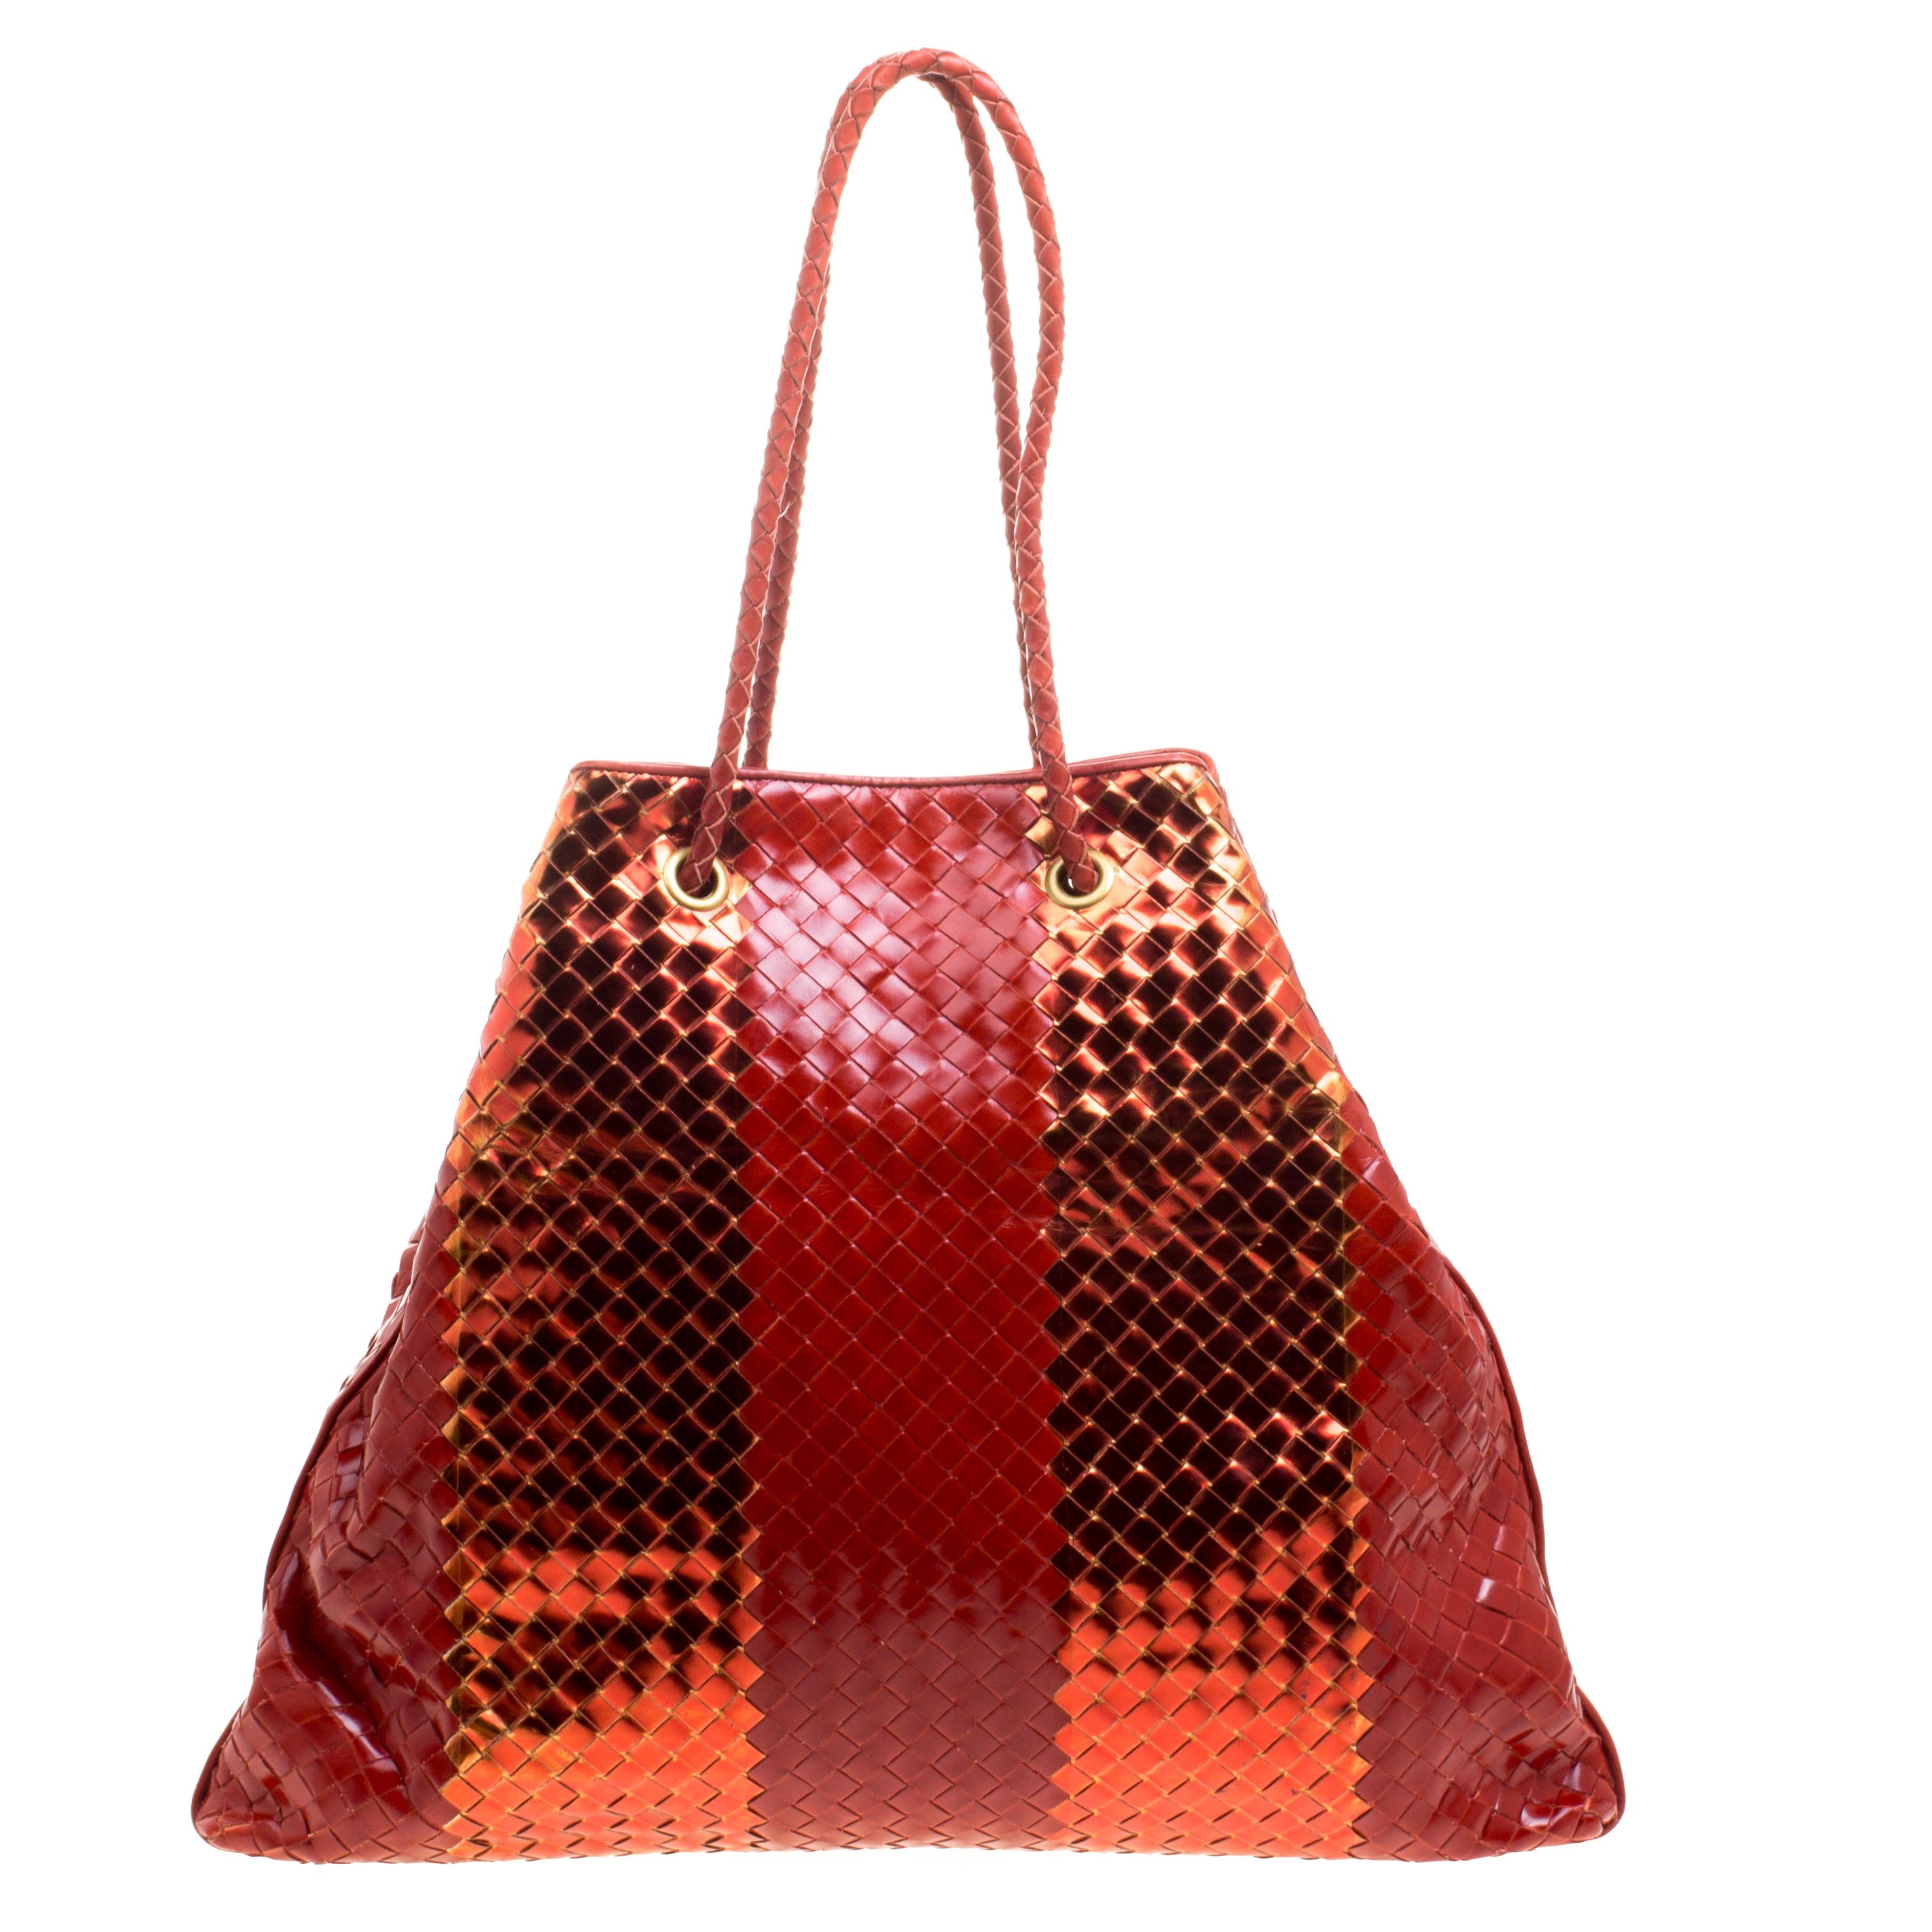 This chic tote from Bottega Veneta is crafted from leather. It features dual braided handles and the exterior of the bag beautifully flaunts the famous Intrecciato pattern that is unique to the fashion house. It has a roomy suede lined interior that